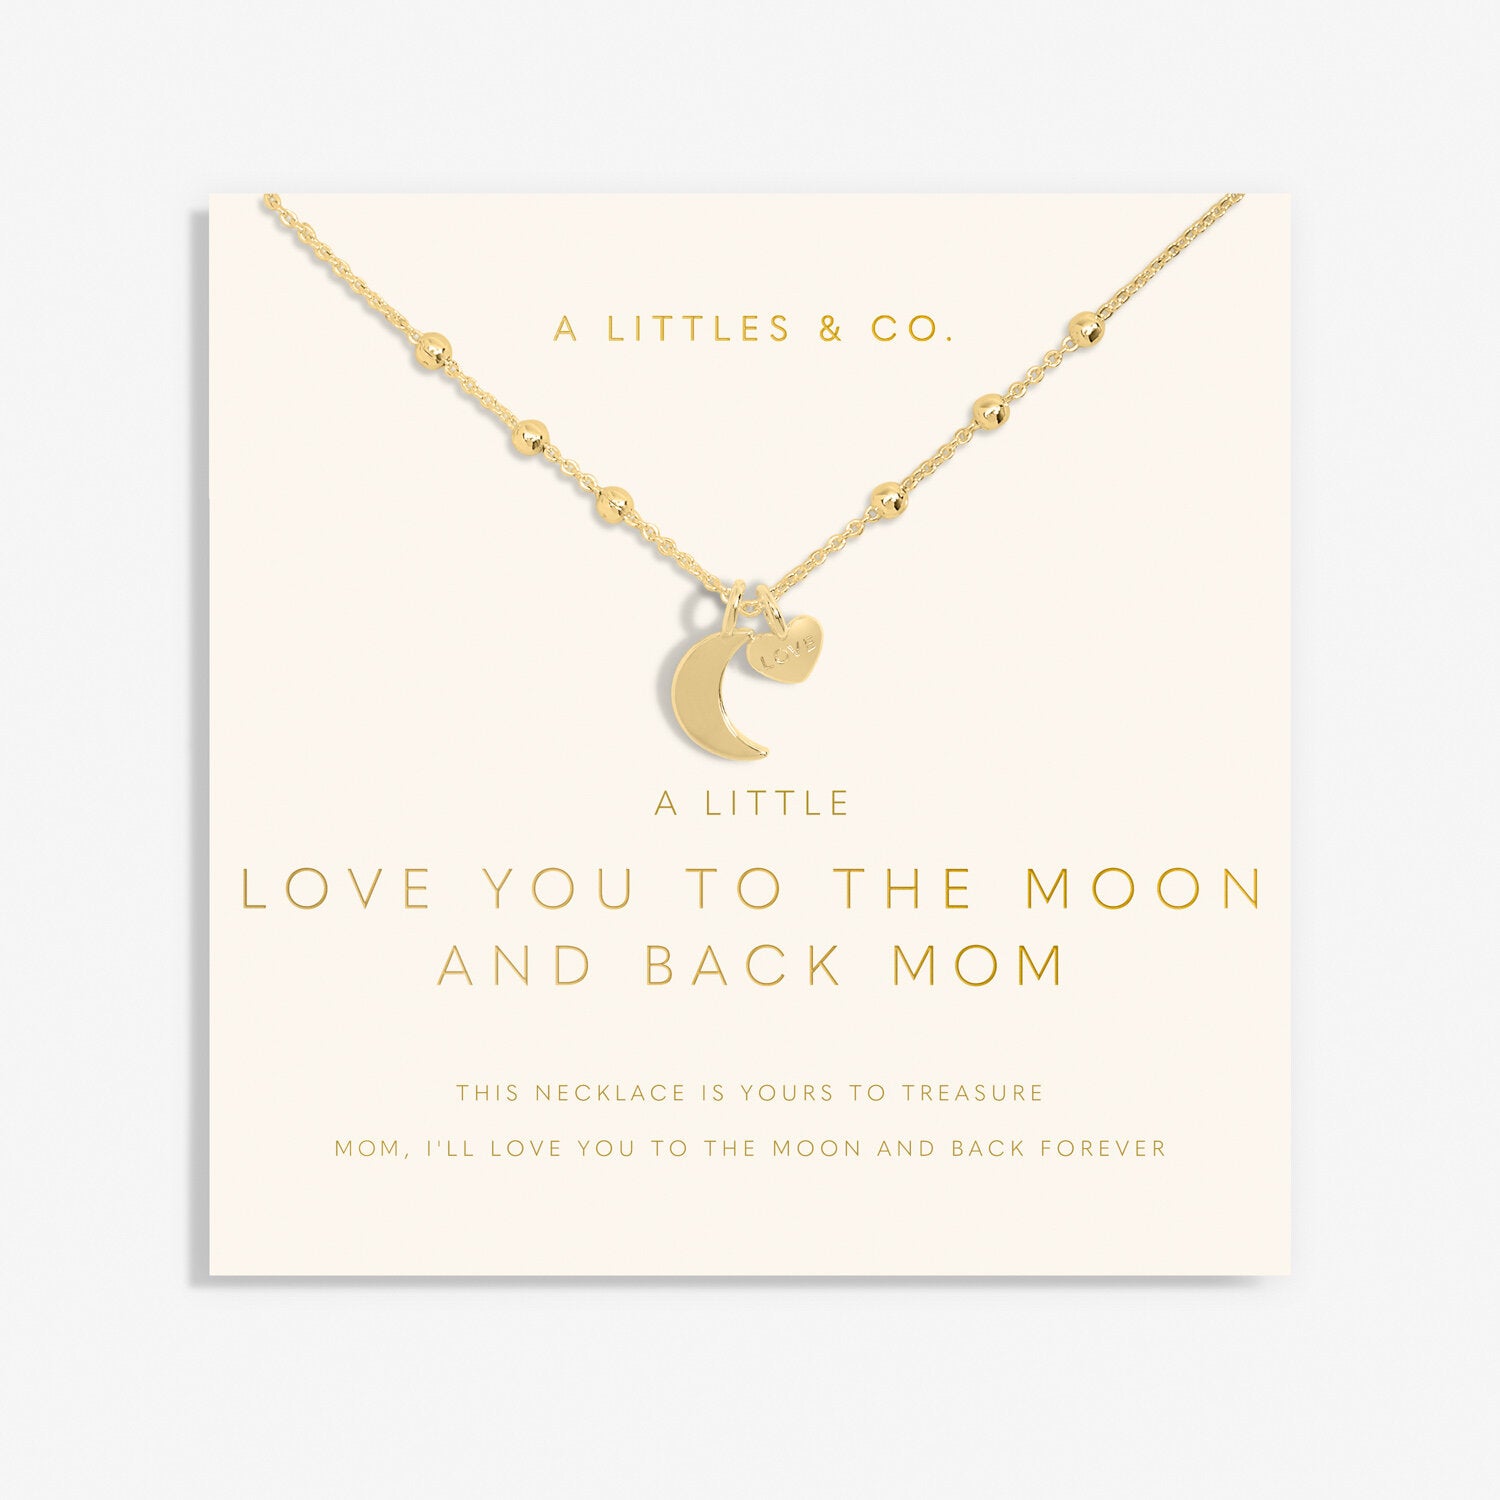 A Little Love You To the Moon &amp; Back Mom